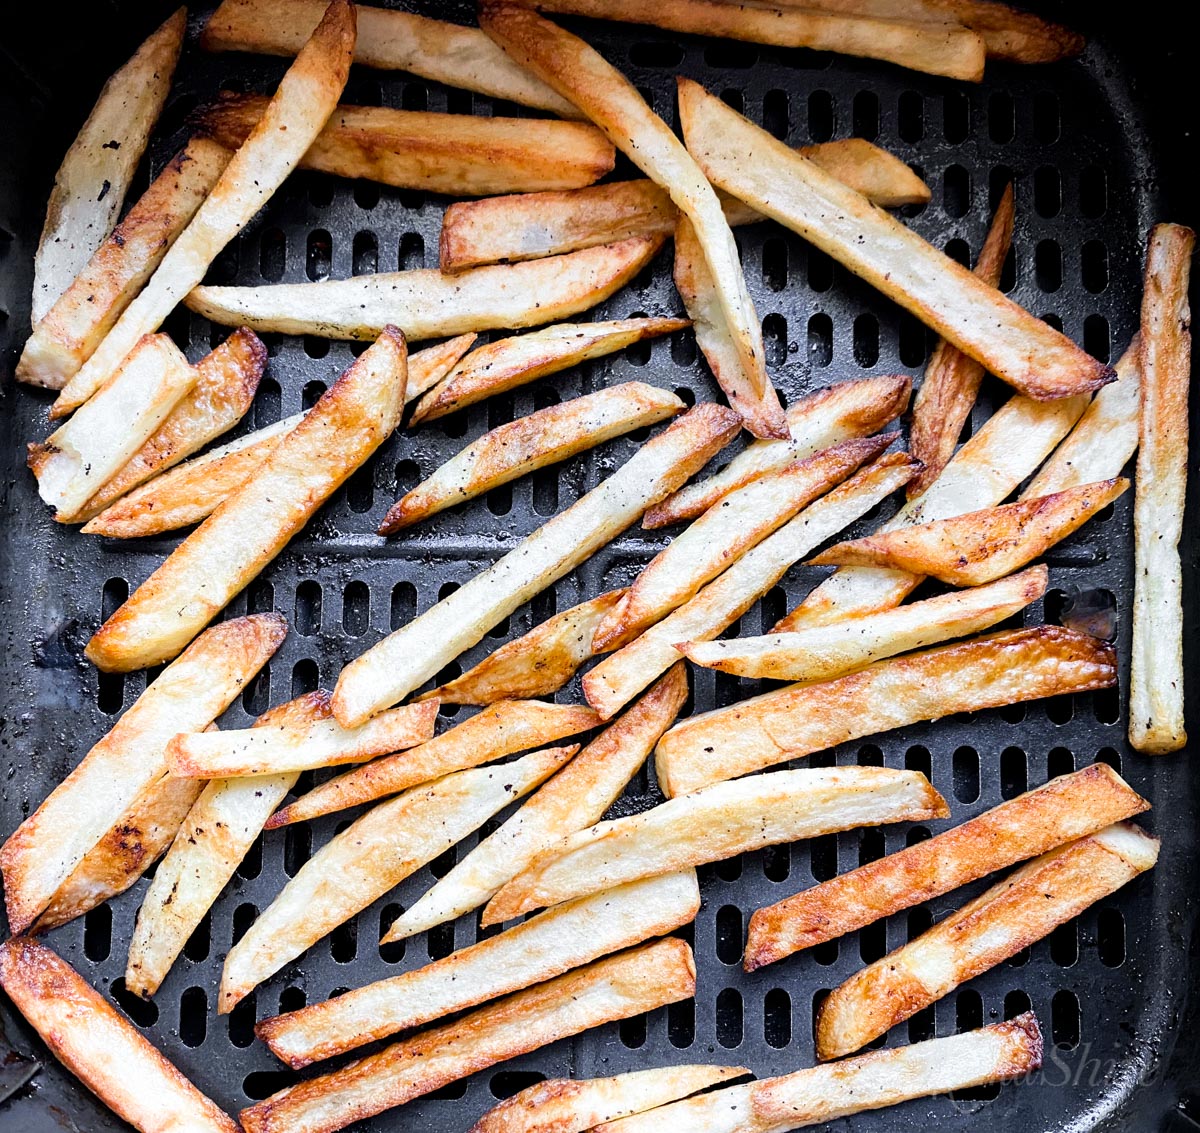 An air fryer basket with freshly fried french fries.